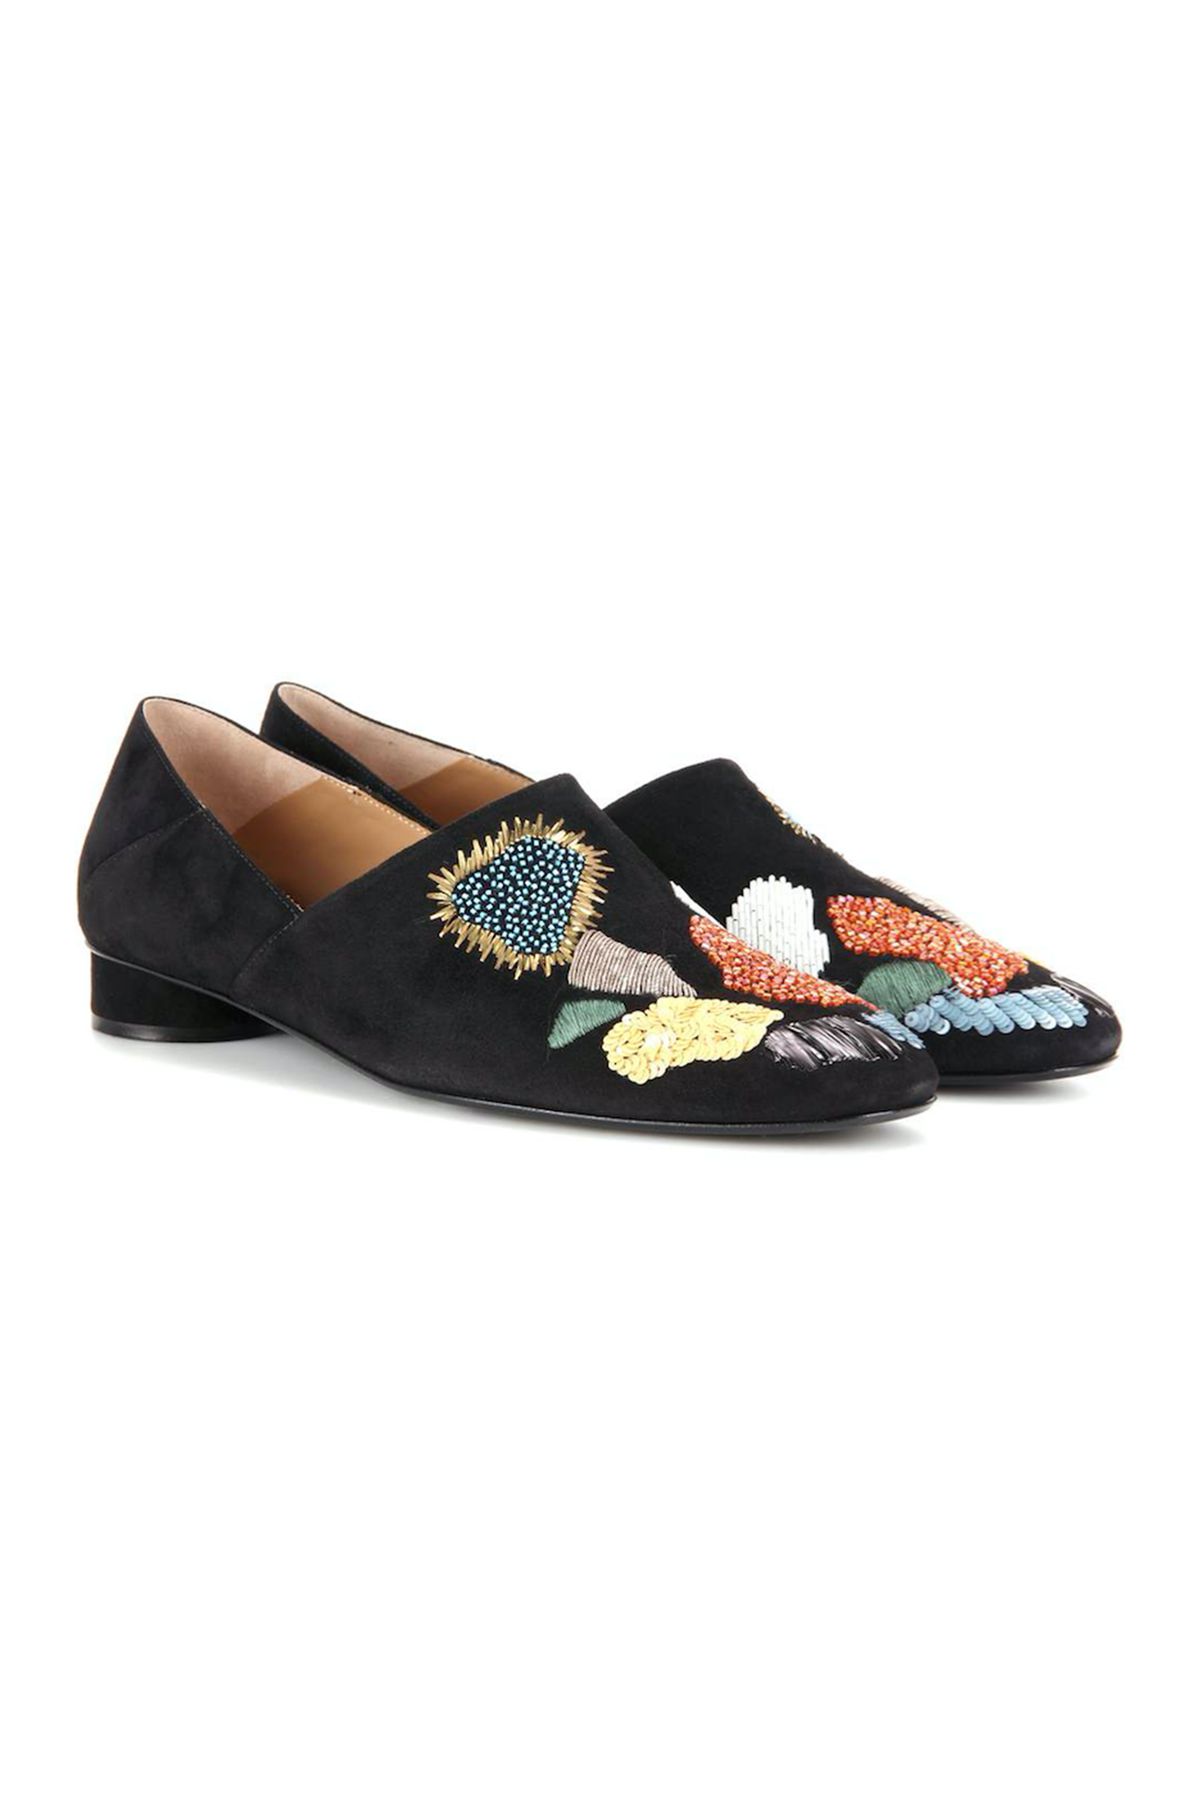 The Row Boelle Embellished Suede Slippers, $986